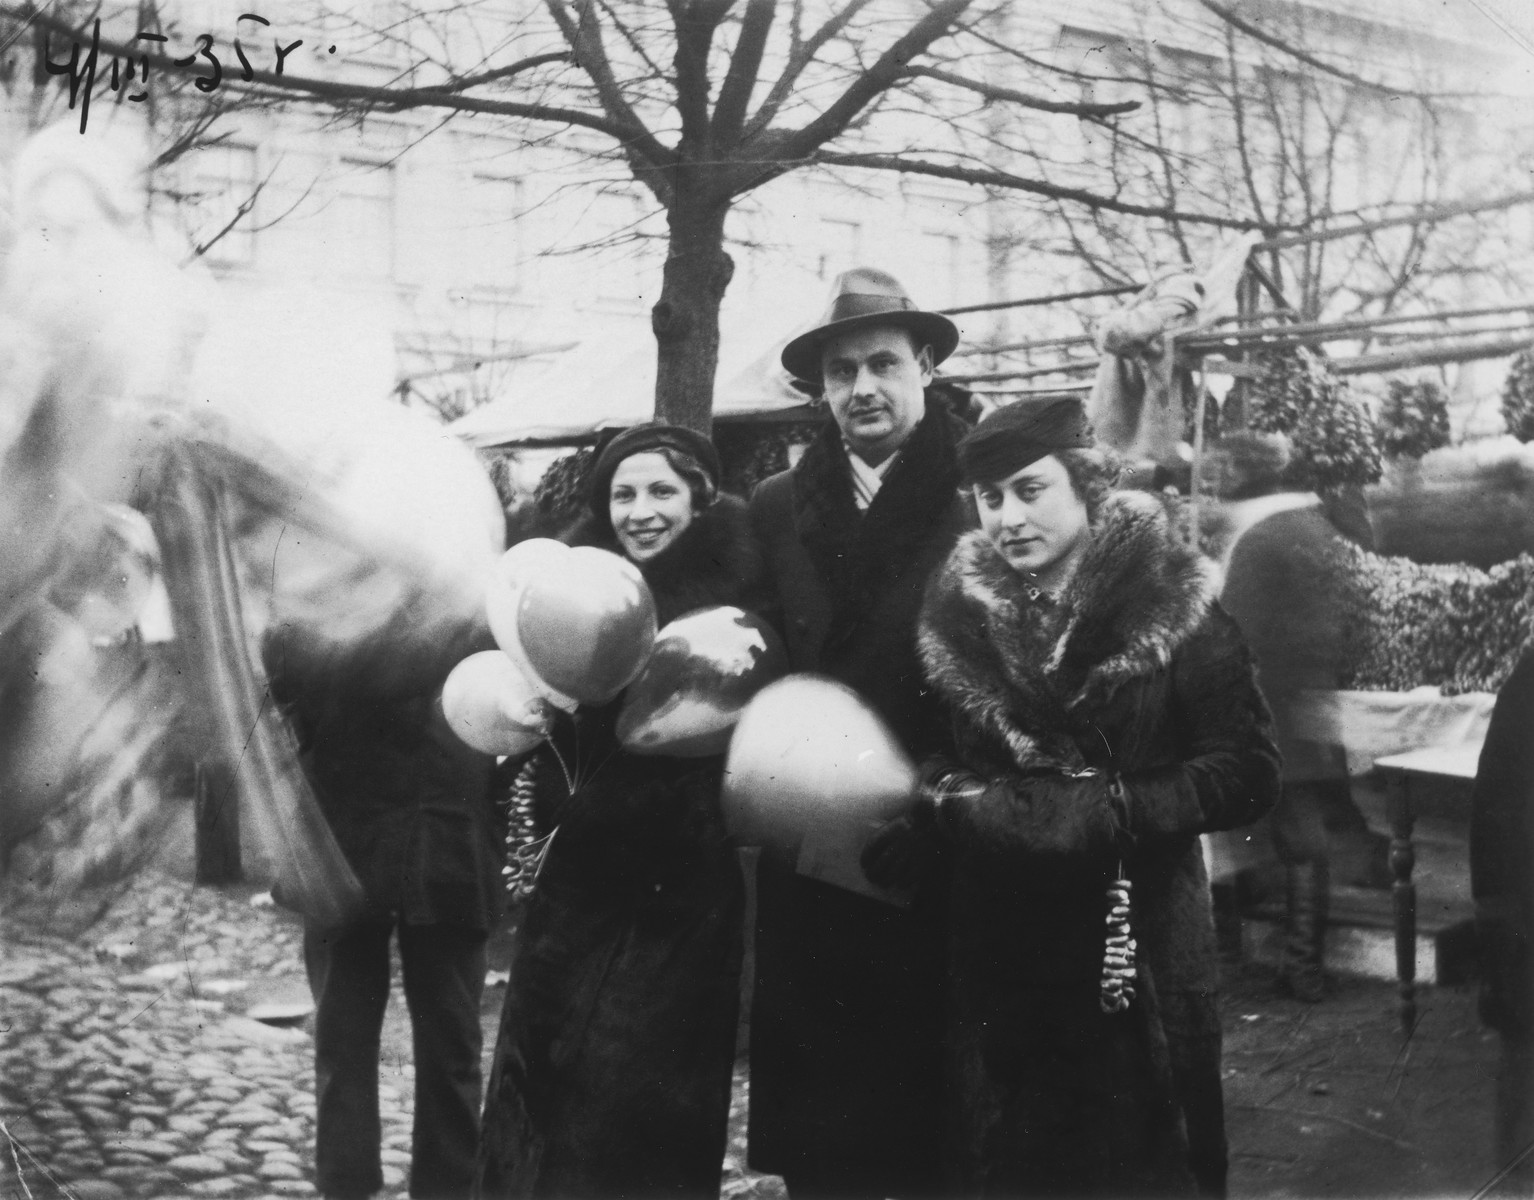 Two Jewish women visit the outdoor mushroom market in Vilna.

Raya Markon is pictured on the left; Raya Lewin is on the right.